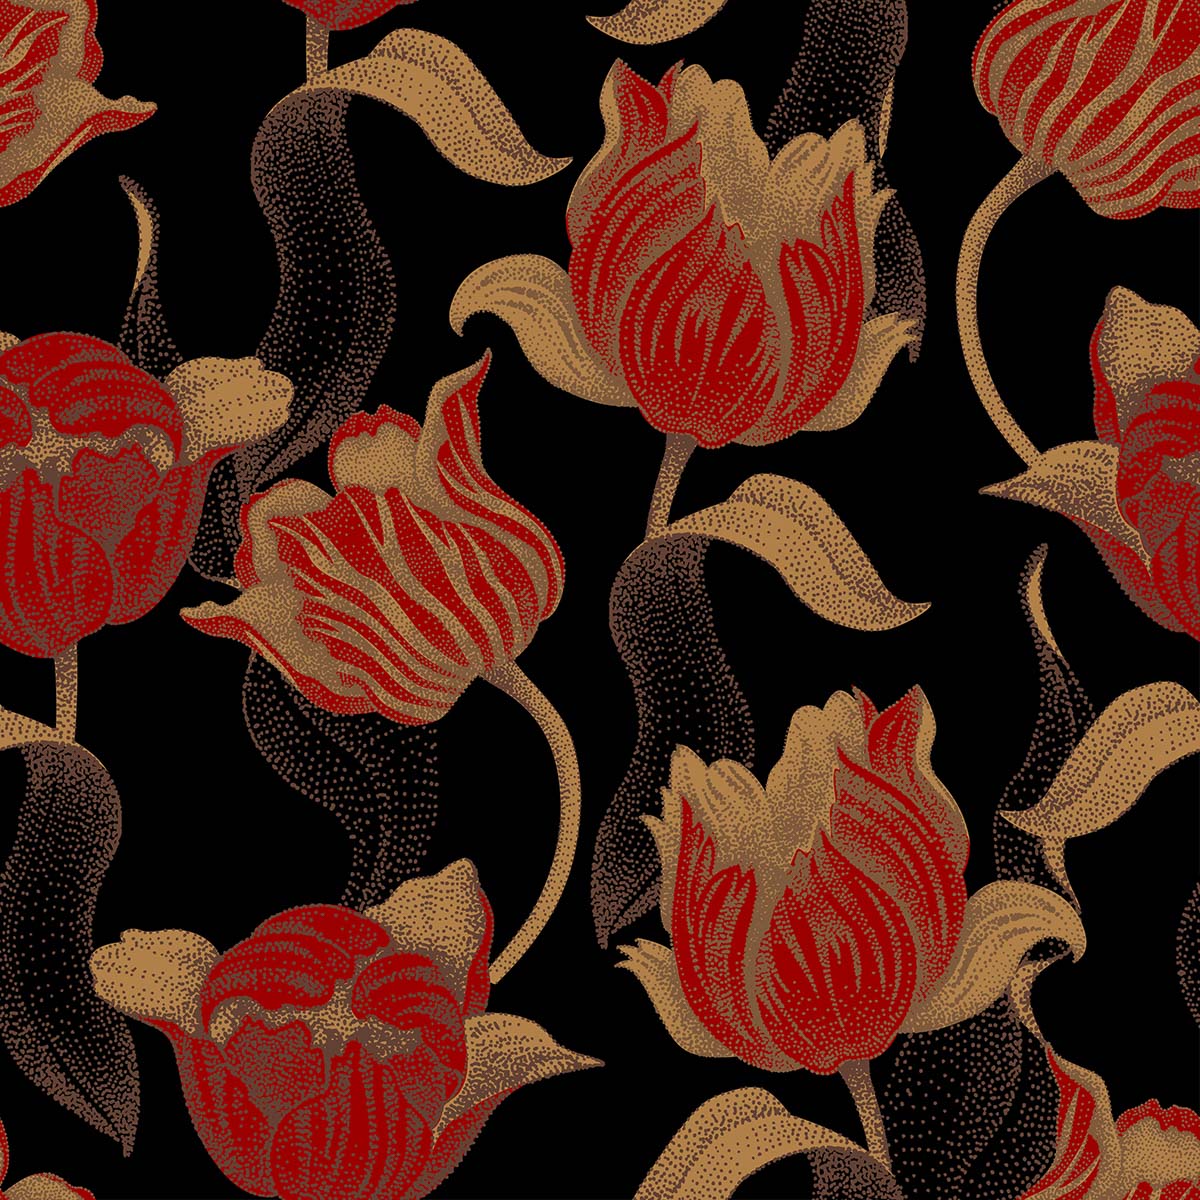 A pattern of red flowers